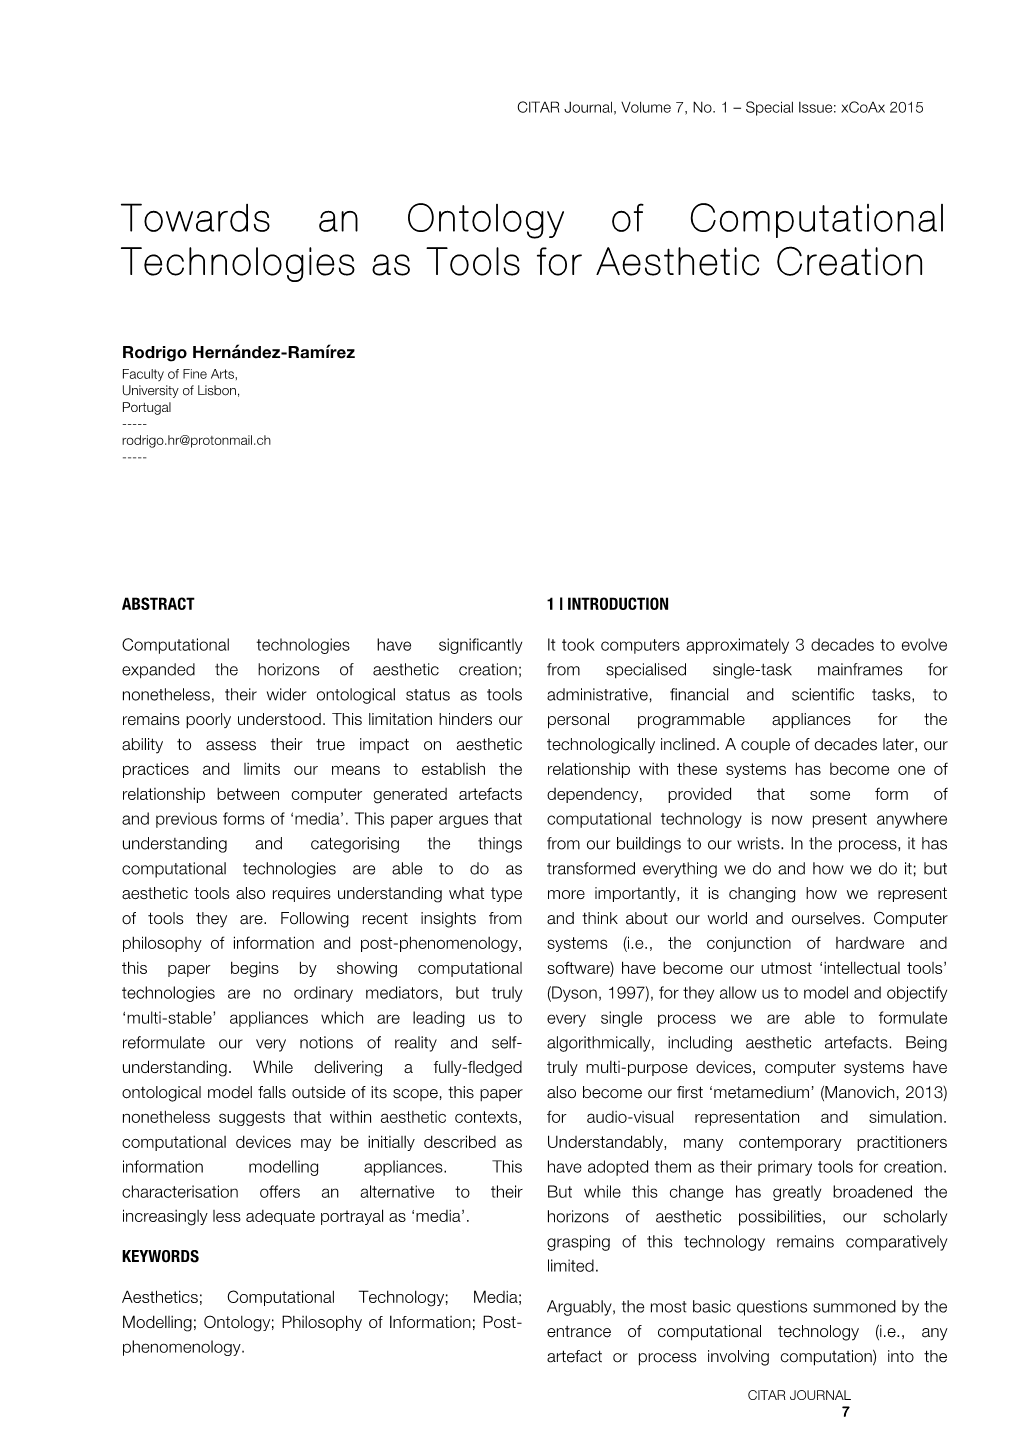 Towards an Ontology of Computational Technologies As Tools for Aesthetic Creation